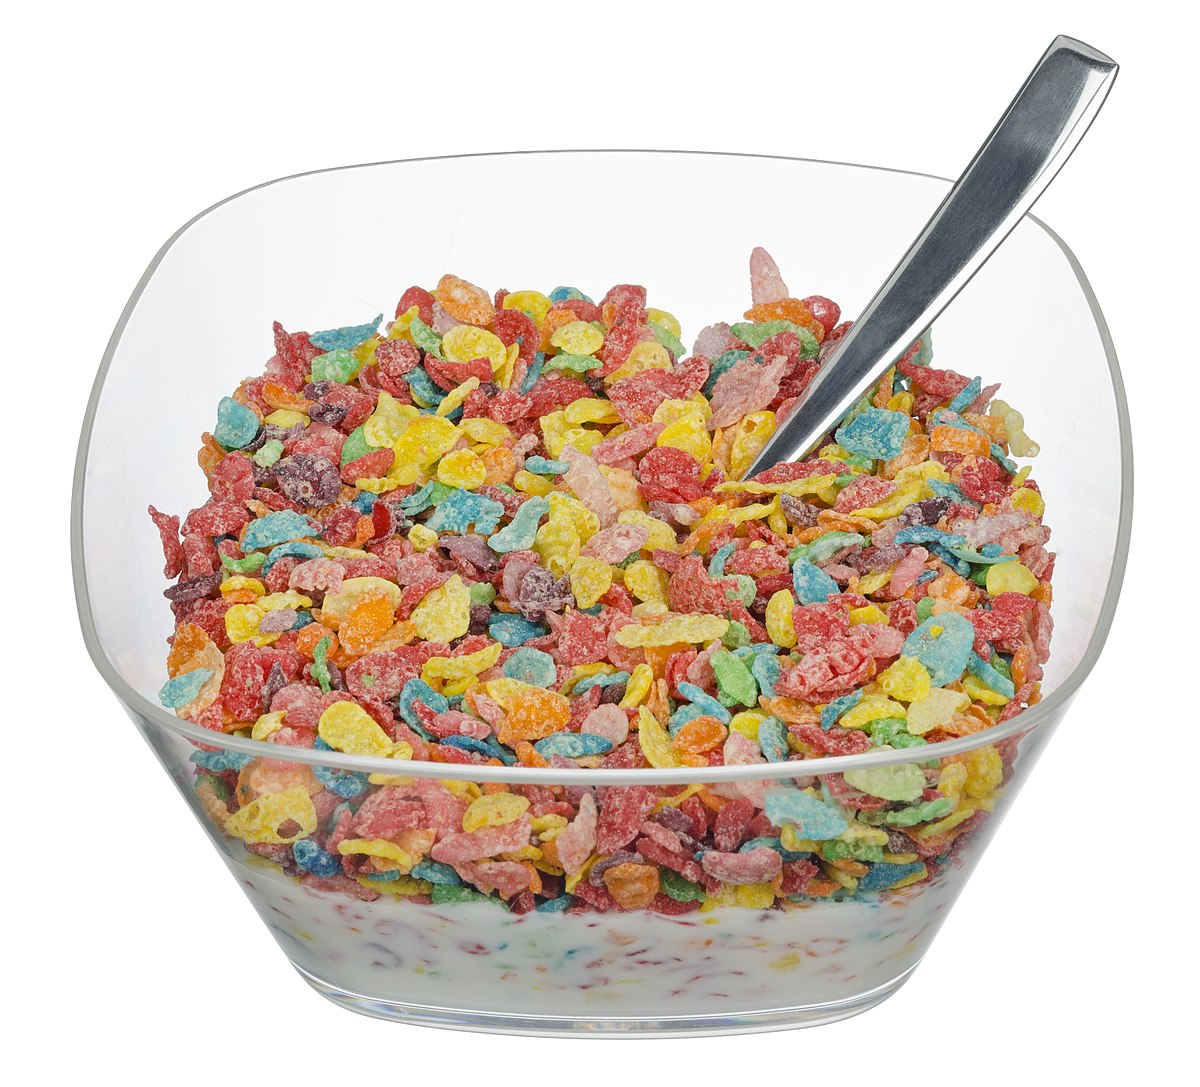 1200px-Cereal-Fruity-Pebbles.jpg